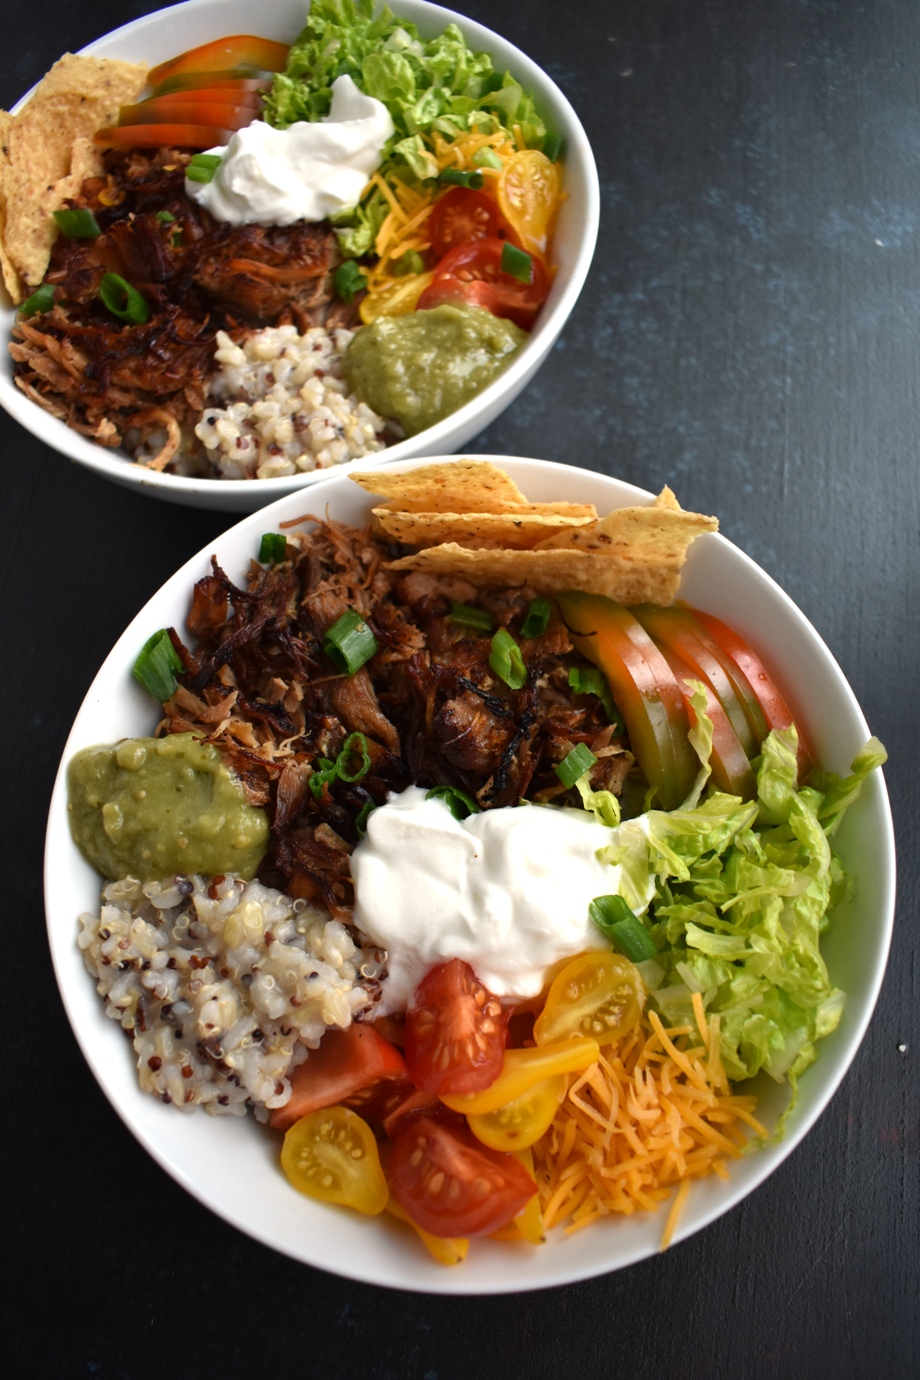 Carnitas Burrito Bowls feature crispy, flavorful pork carnitas, brown rice, cheddar cheese, tomato, green onion, chips, bell peppers and more for a fresh, filling meal ready in about 30 minutes! www.nutritionistreviews.com #mexicanfood #mexican #burrito #pork #dinner #easydinner